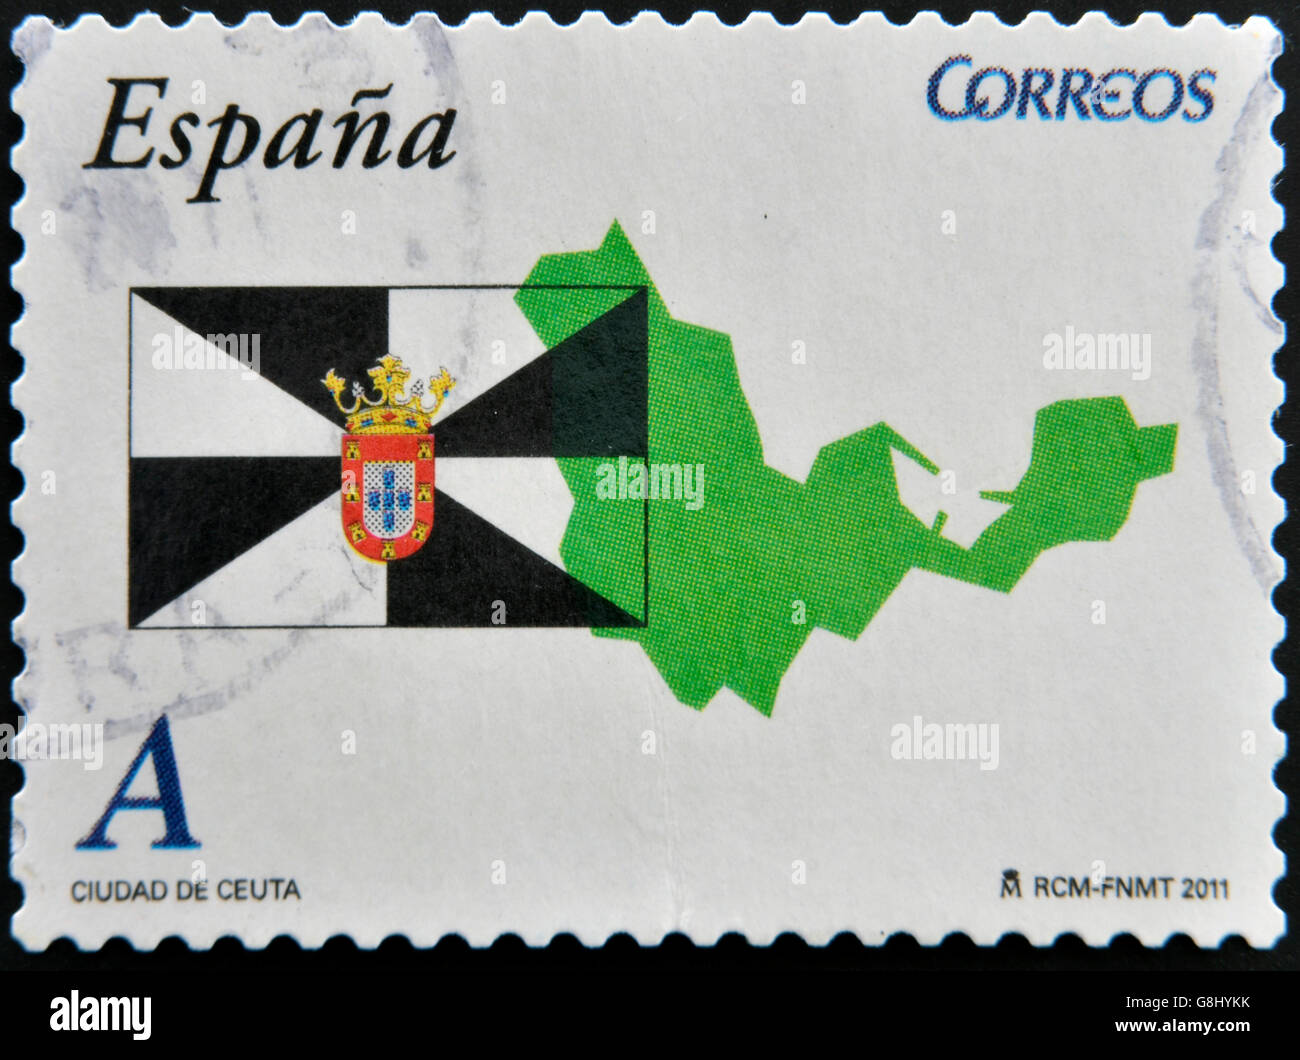 SPAIN - CIRCA 2011: A stamp printed in spain shows flag and map of the autonomous city of Ceuta, circa 2011 Stock Photo